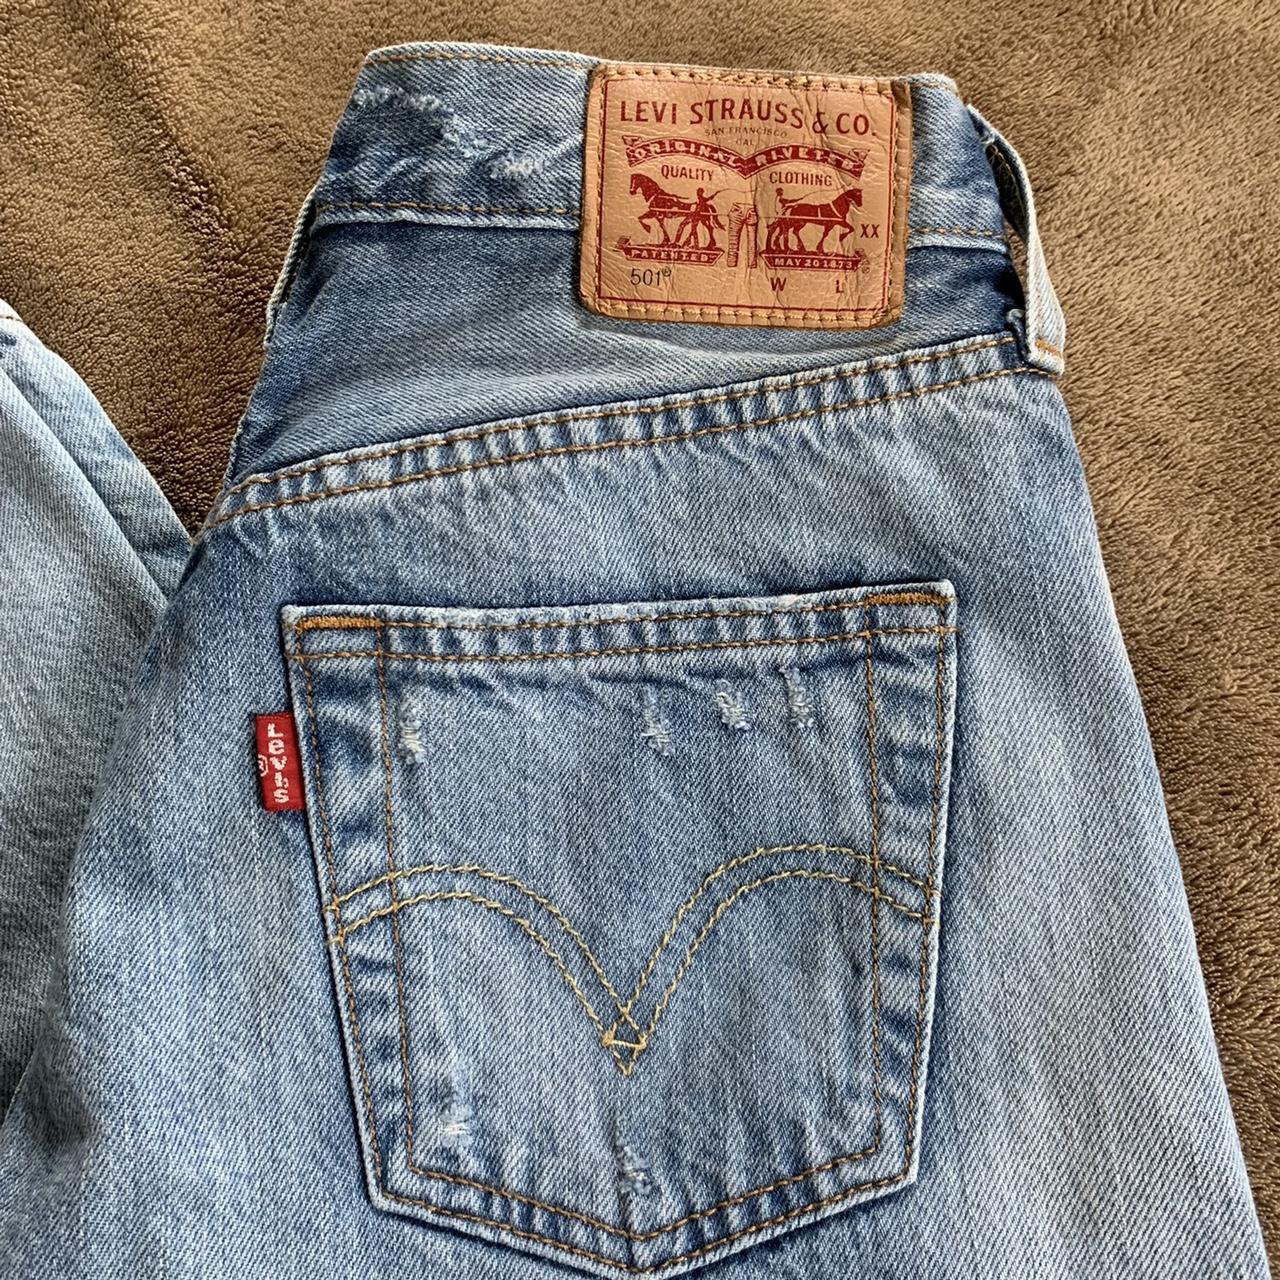 Levi 501 Jeans. W25 L32. I love these but they... - Depop